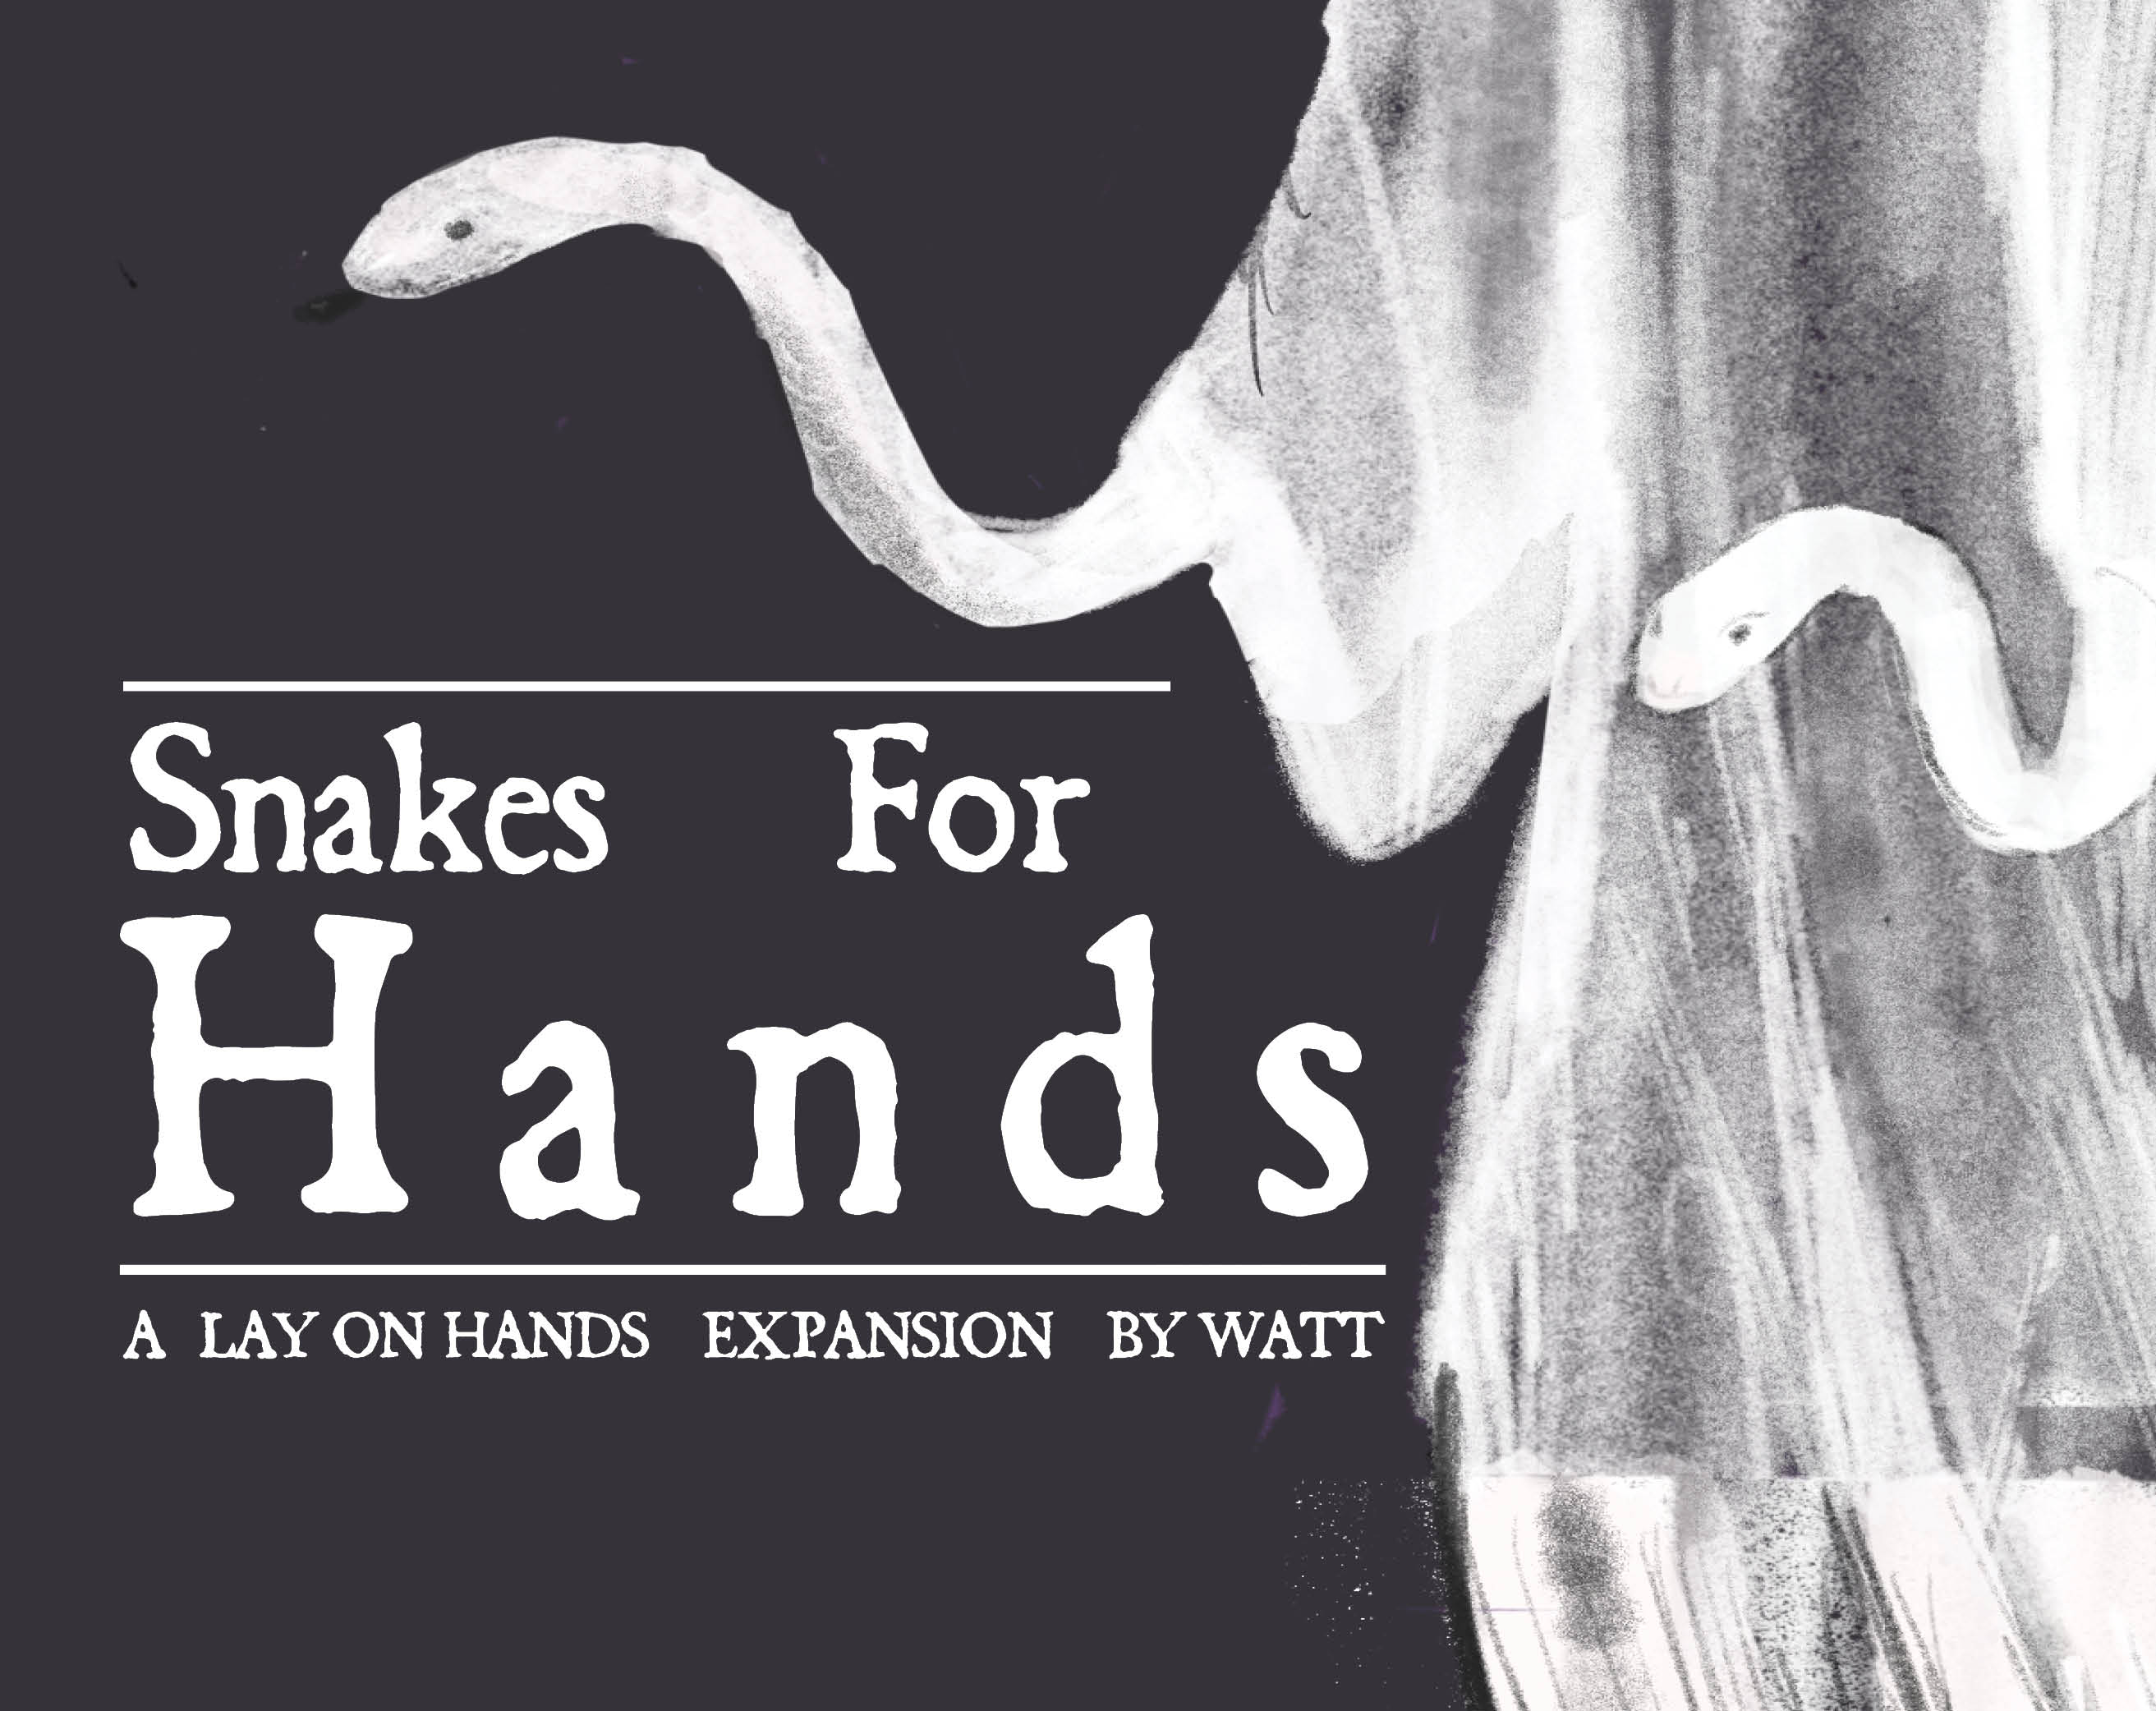 SNAKES FOR HANDS